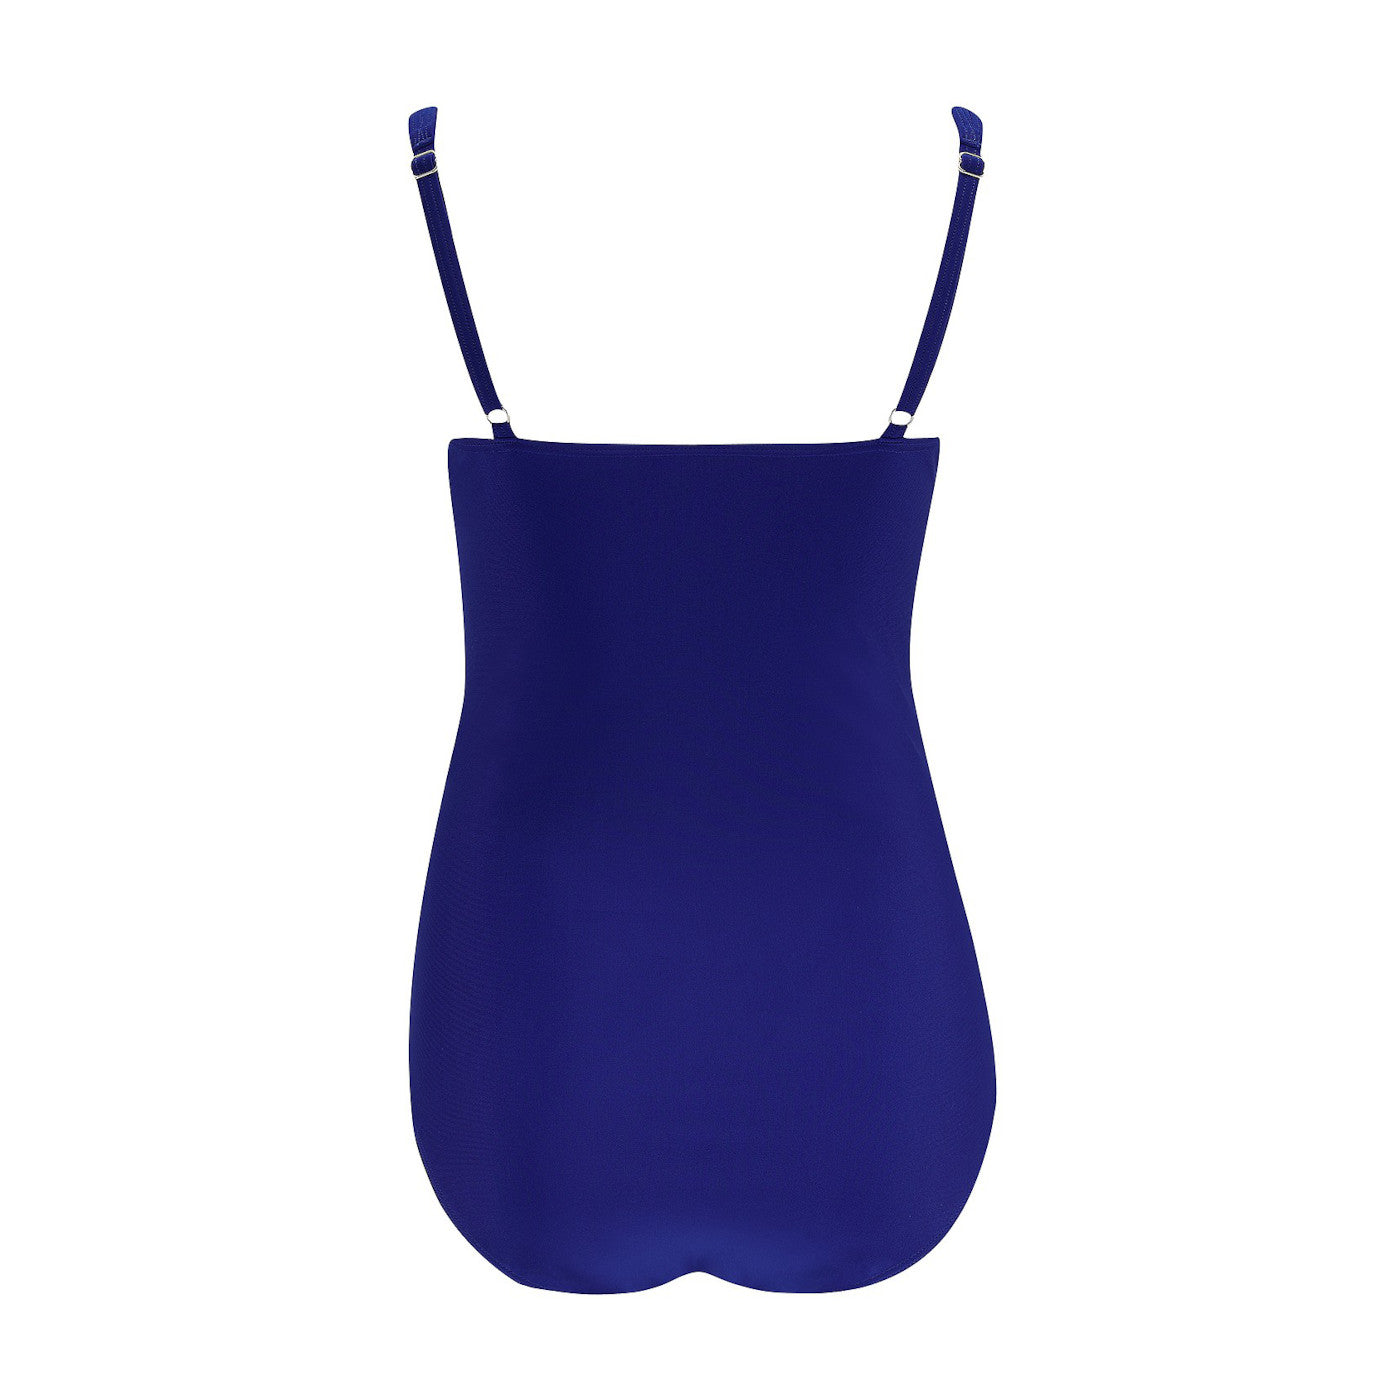 Monte Carlo Ruched Swimsuit in bright blue | Swimwear from Nicola Jane | Pocketed mastectomy swimwear for women touched by breast cancer